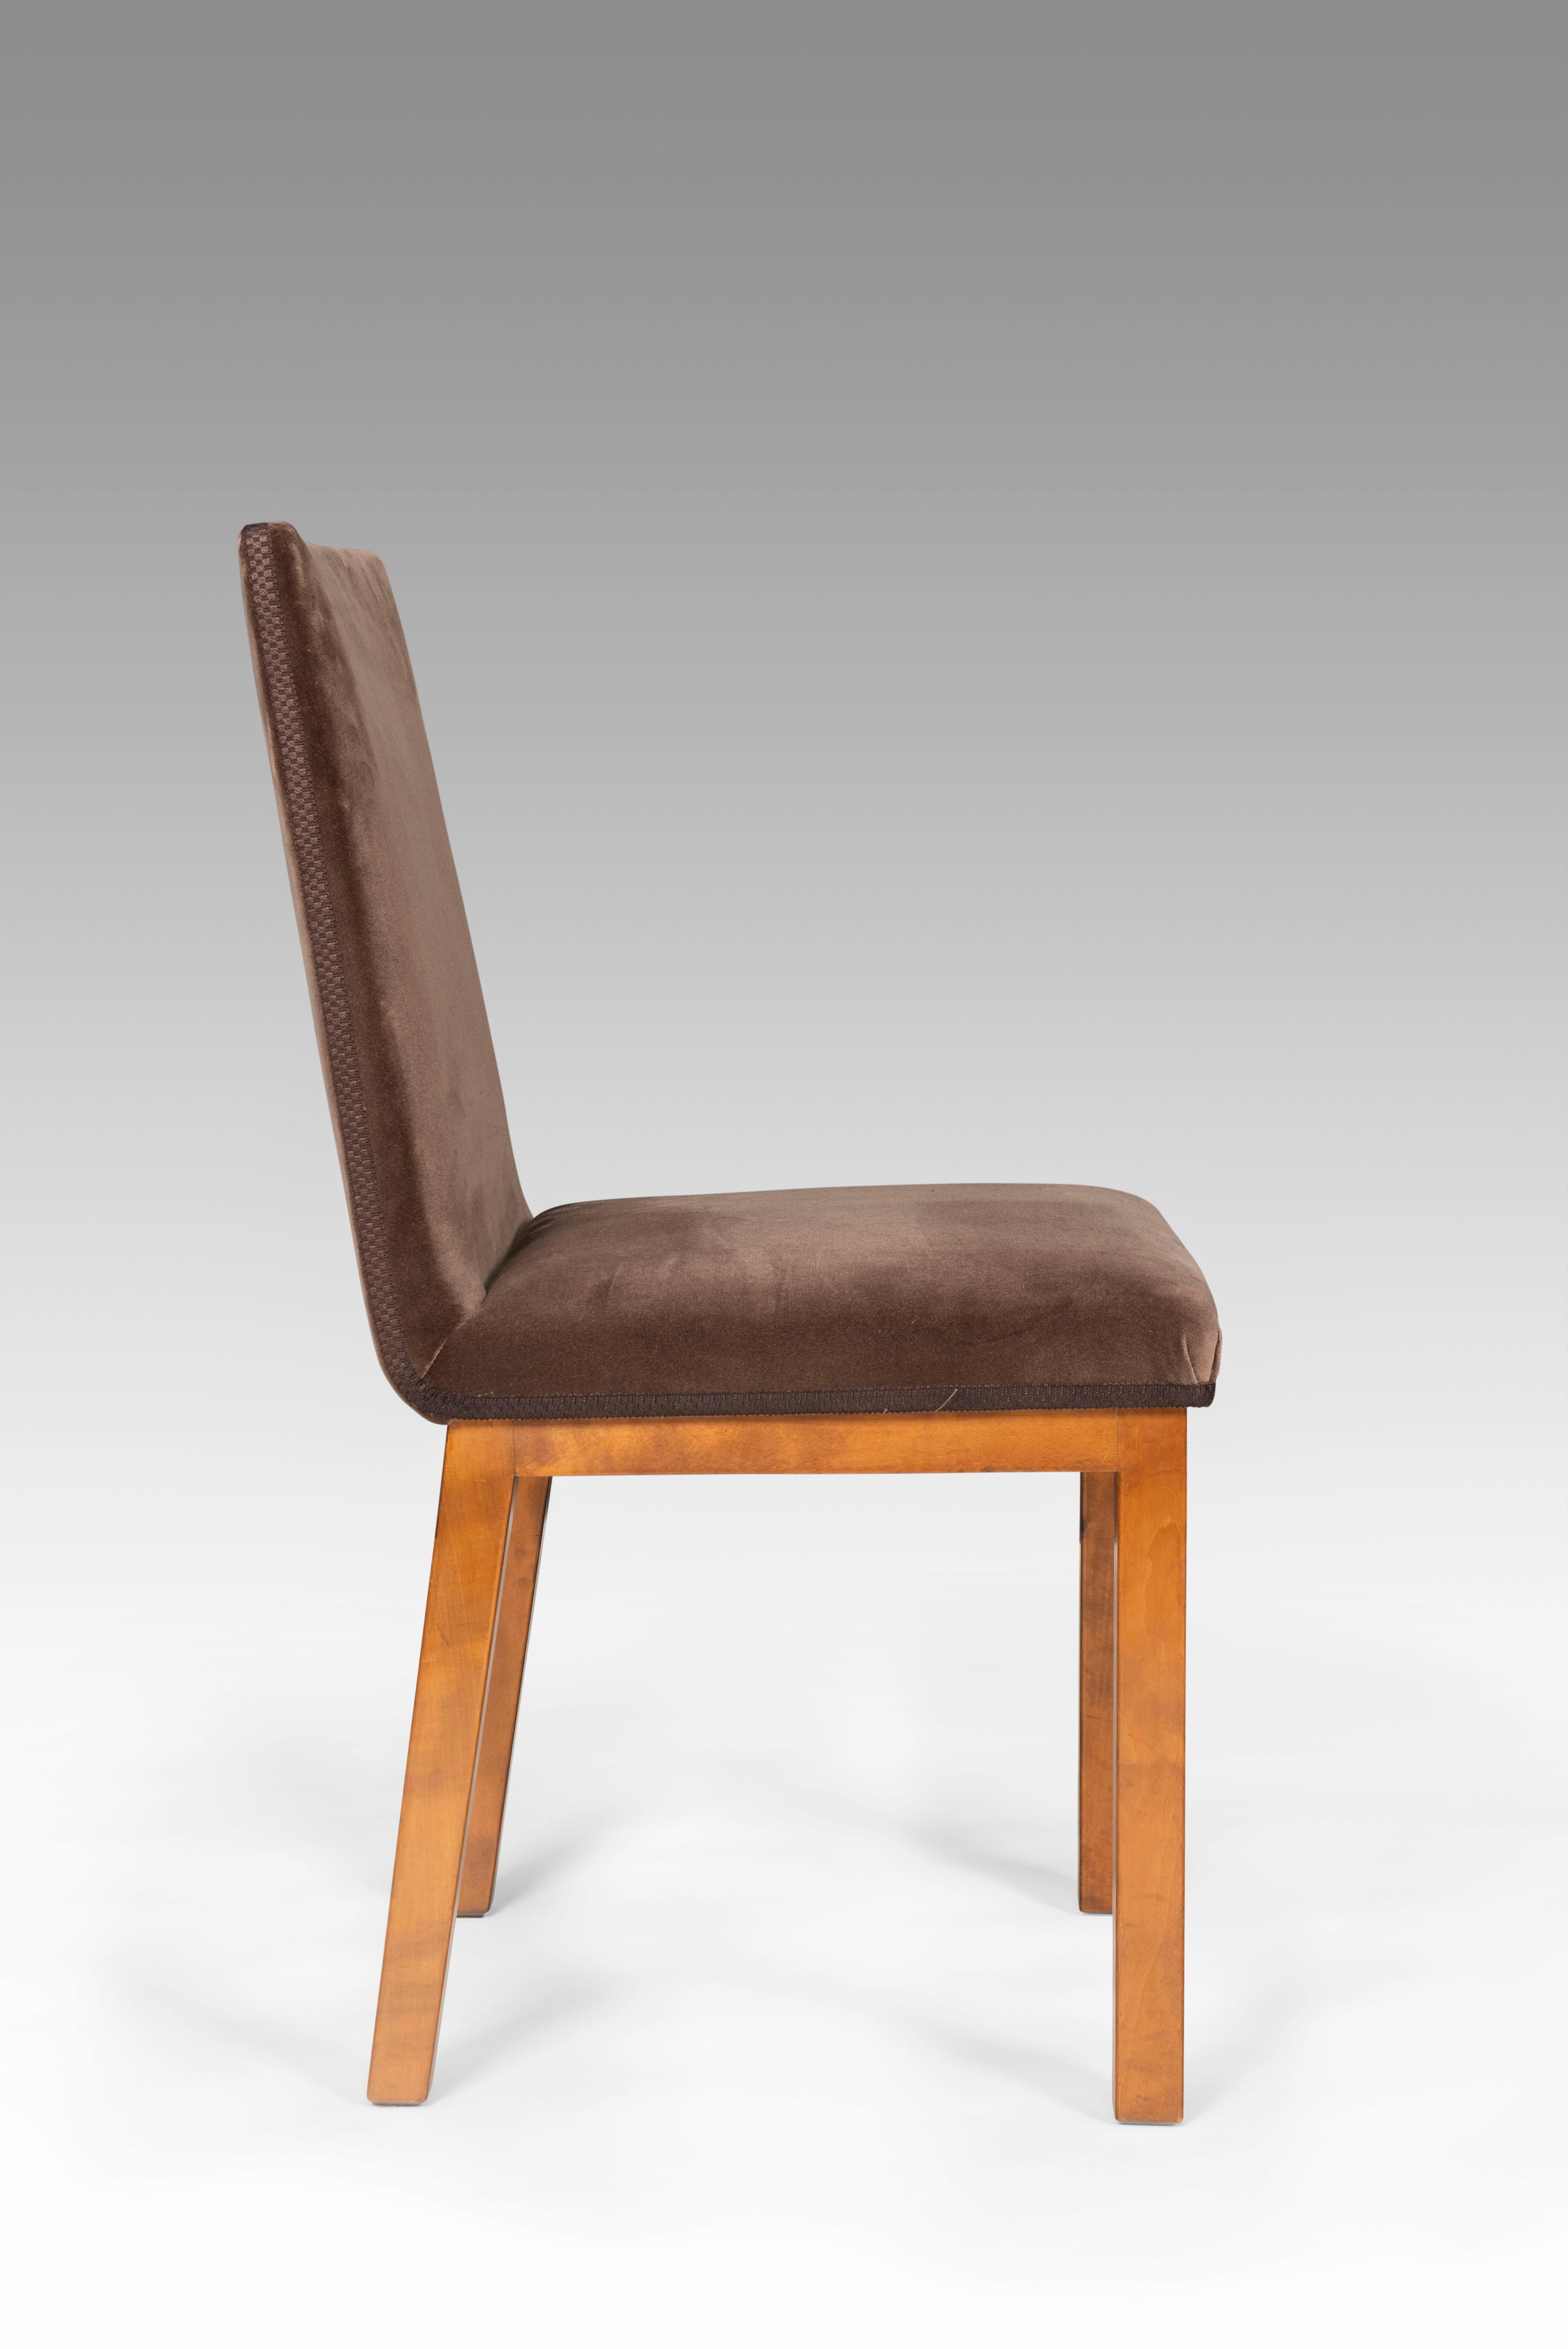 Axel Einar Hjorth Corall Set of 4 Chairs Birch and Velvet 1934 For Sale 1